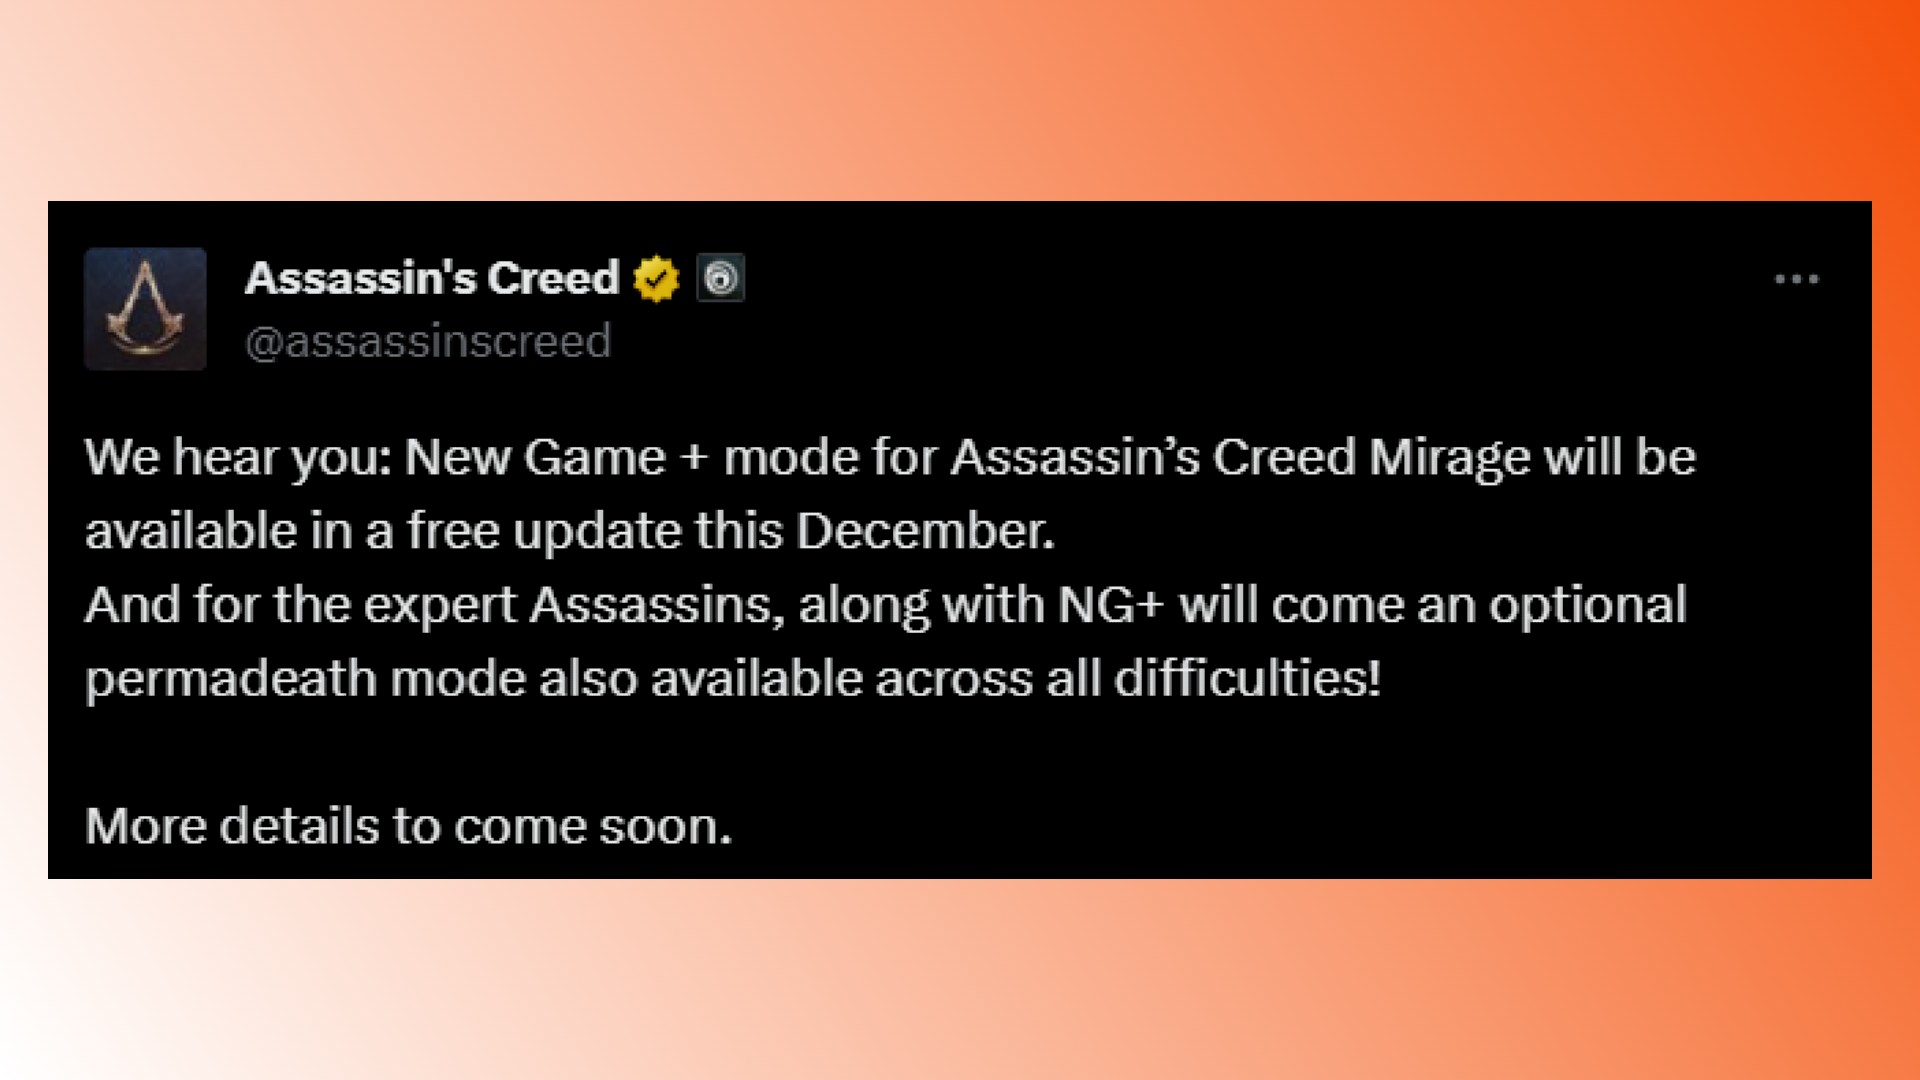 Assassin's Creed Mirage New Game Plus: A tweet from Ubisoft regarding RPG stealth game Assassin's Creed Mirage